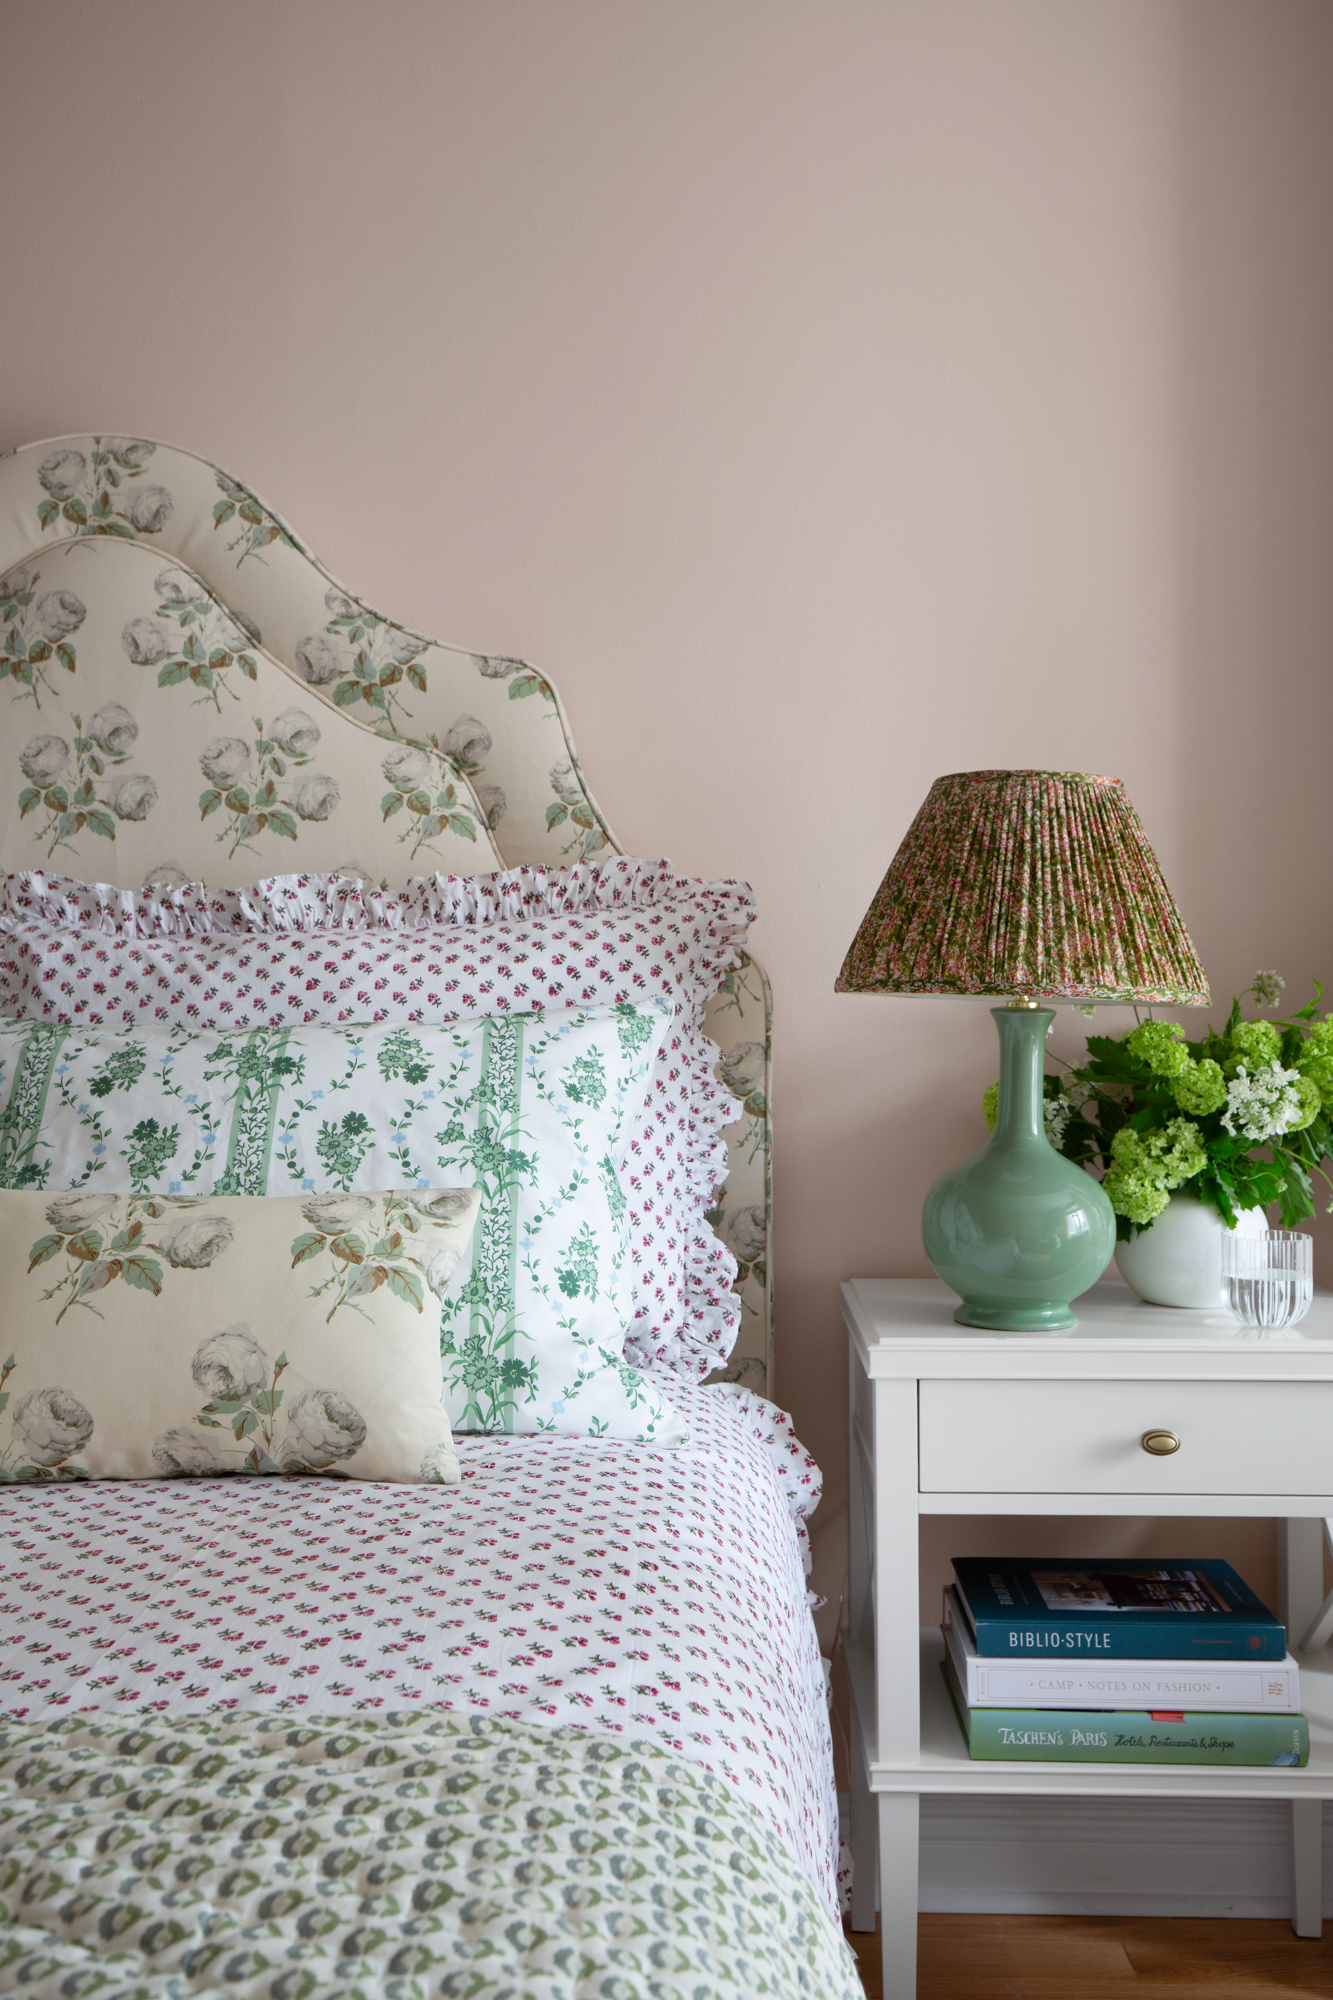 Chintz, whimsy and cake: all about the interiors style of the last